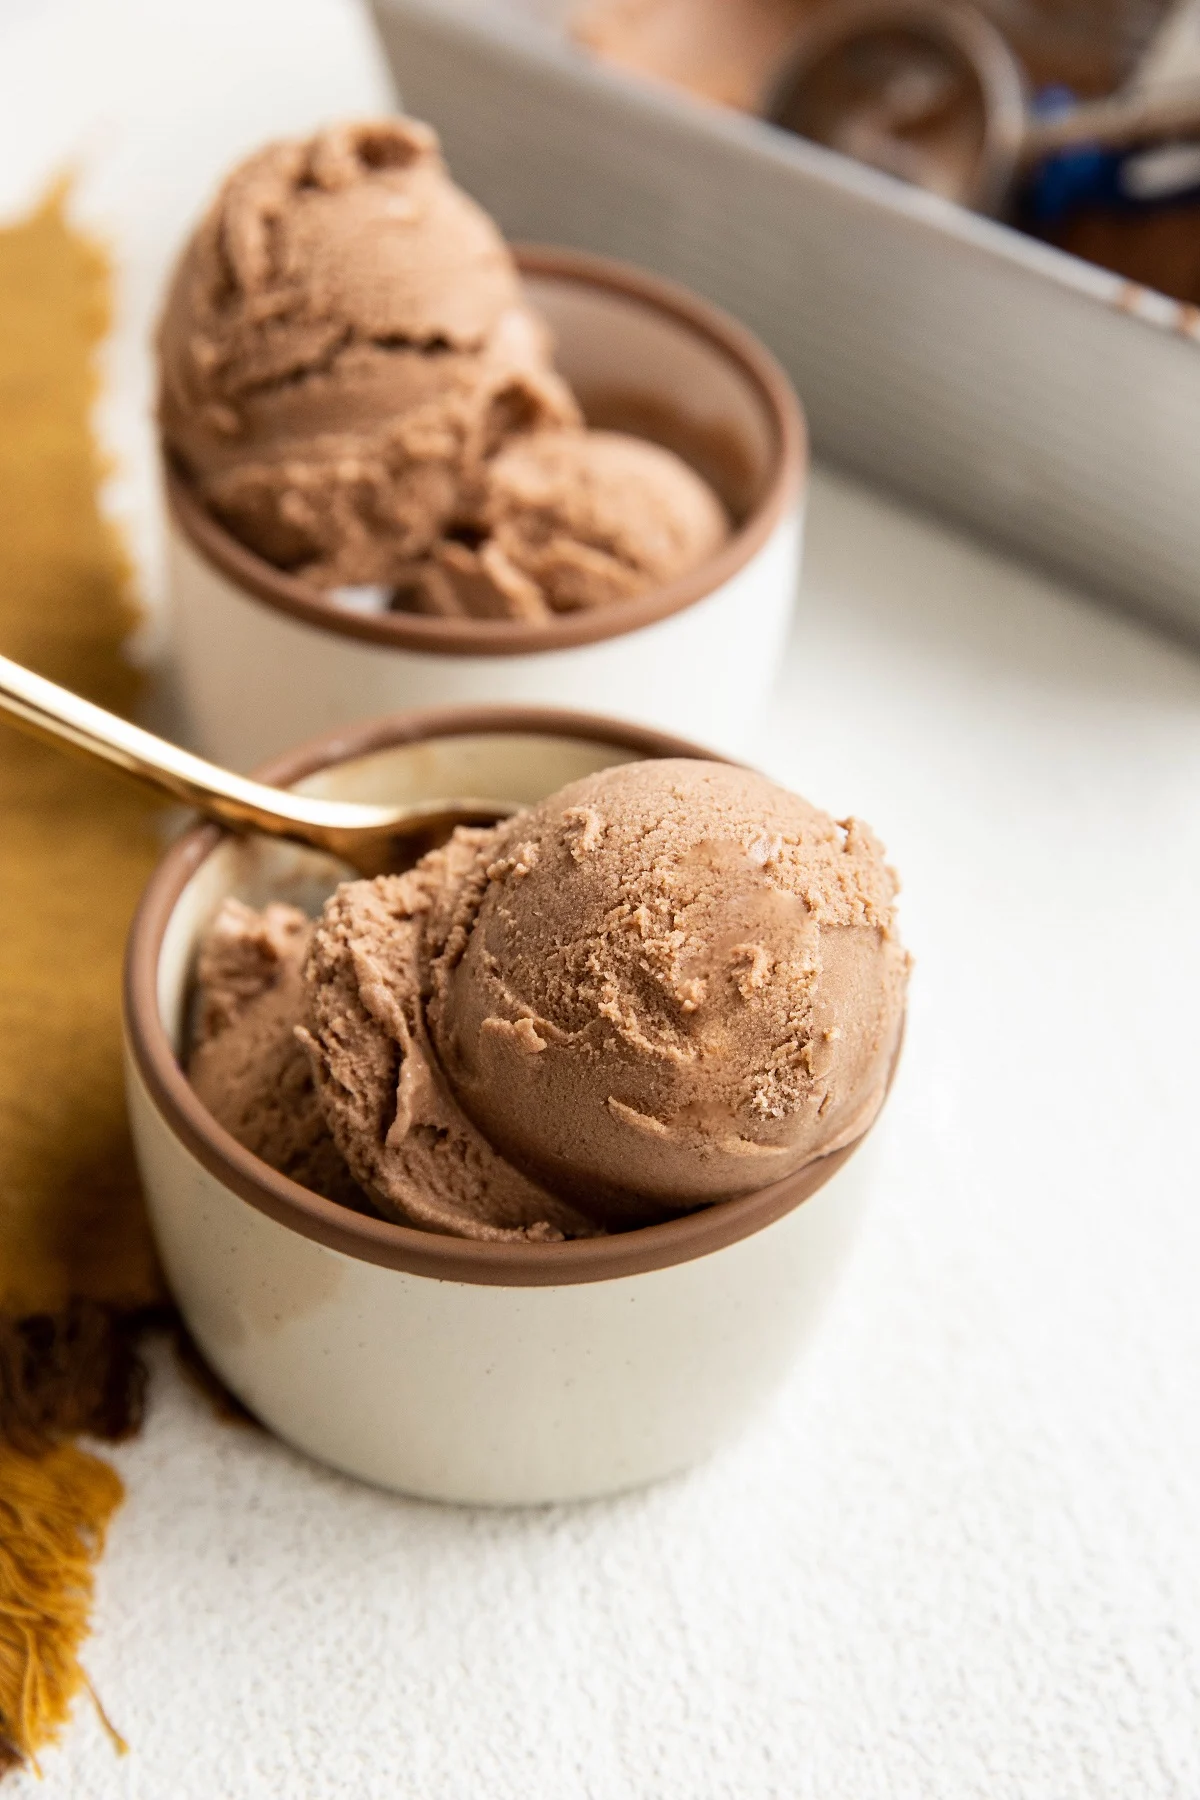 Two bowls of delicious dairy-free chocolate ice cream.